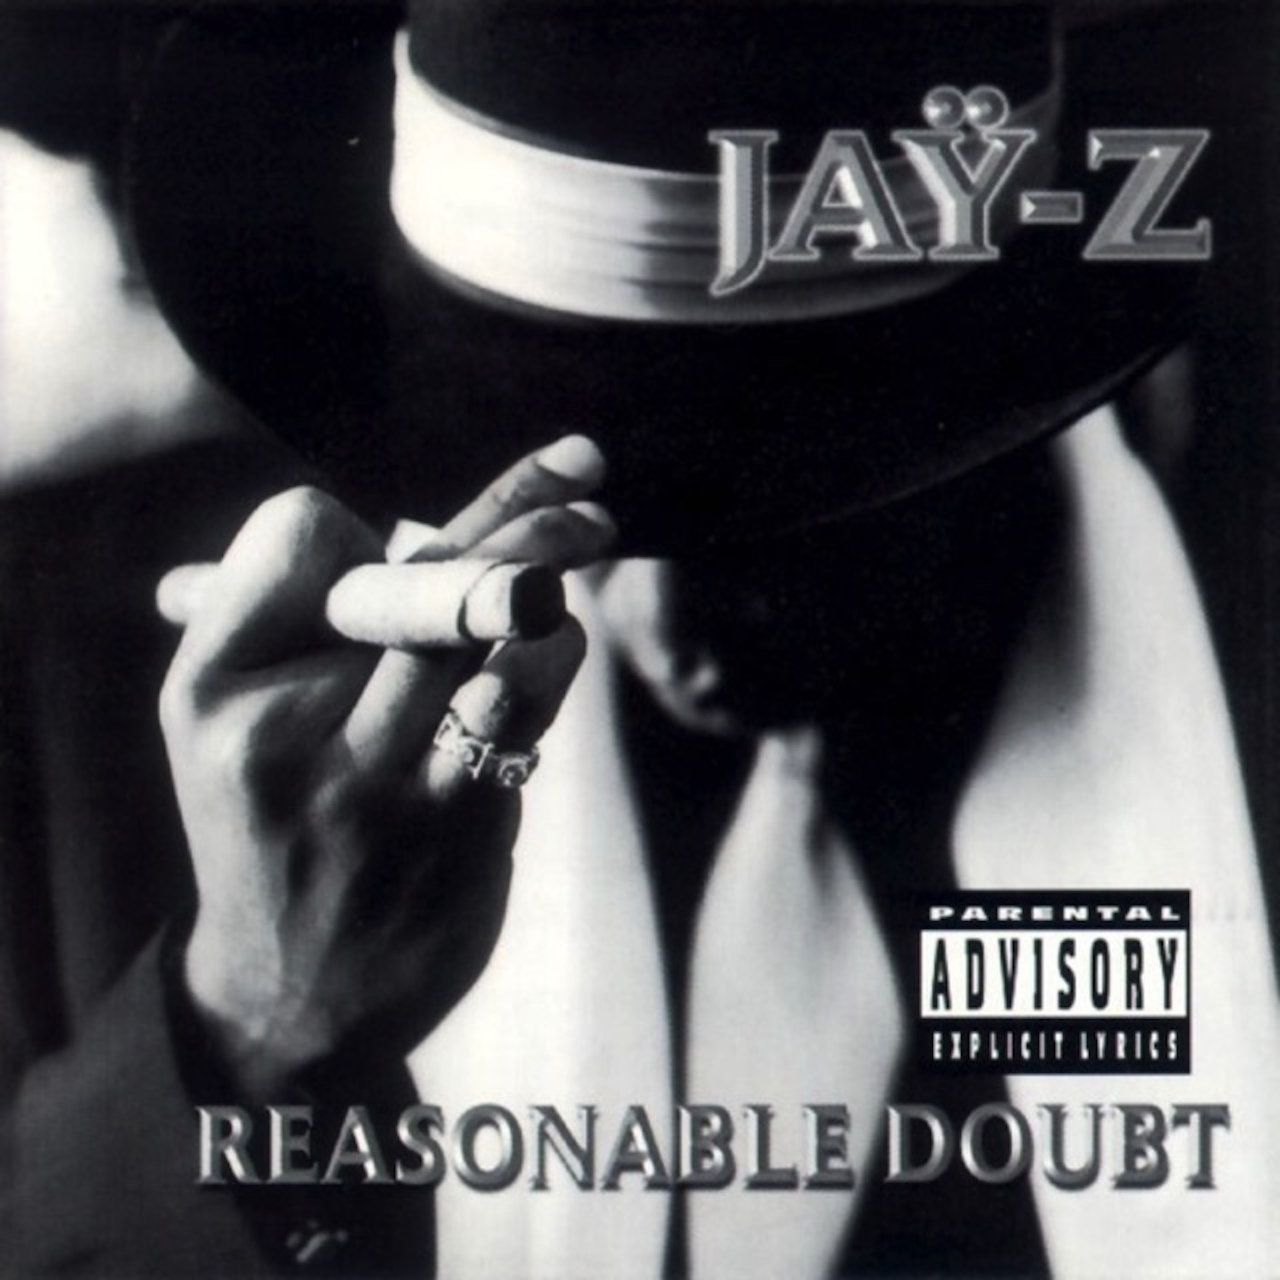 Jay-Z - Reasonable Doubt (Cover)